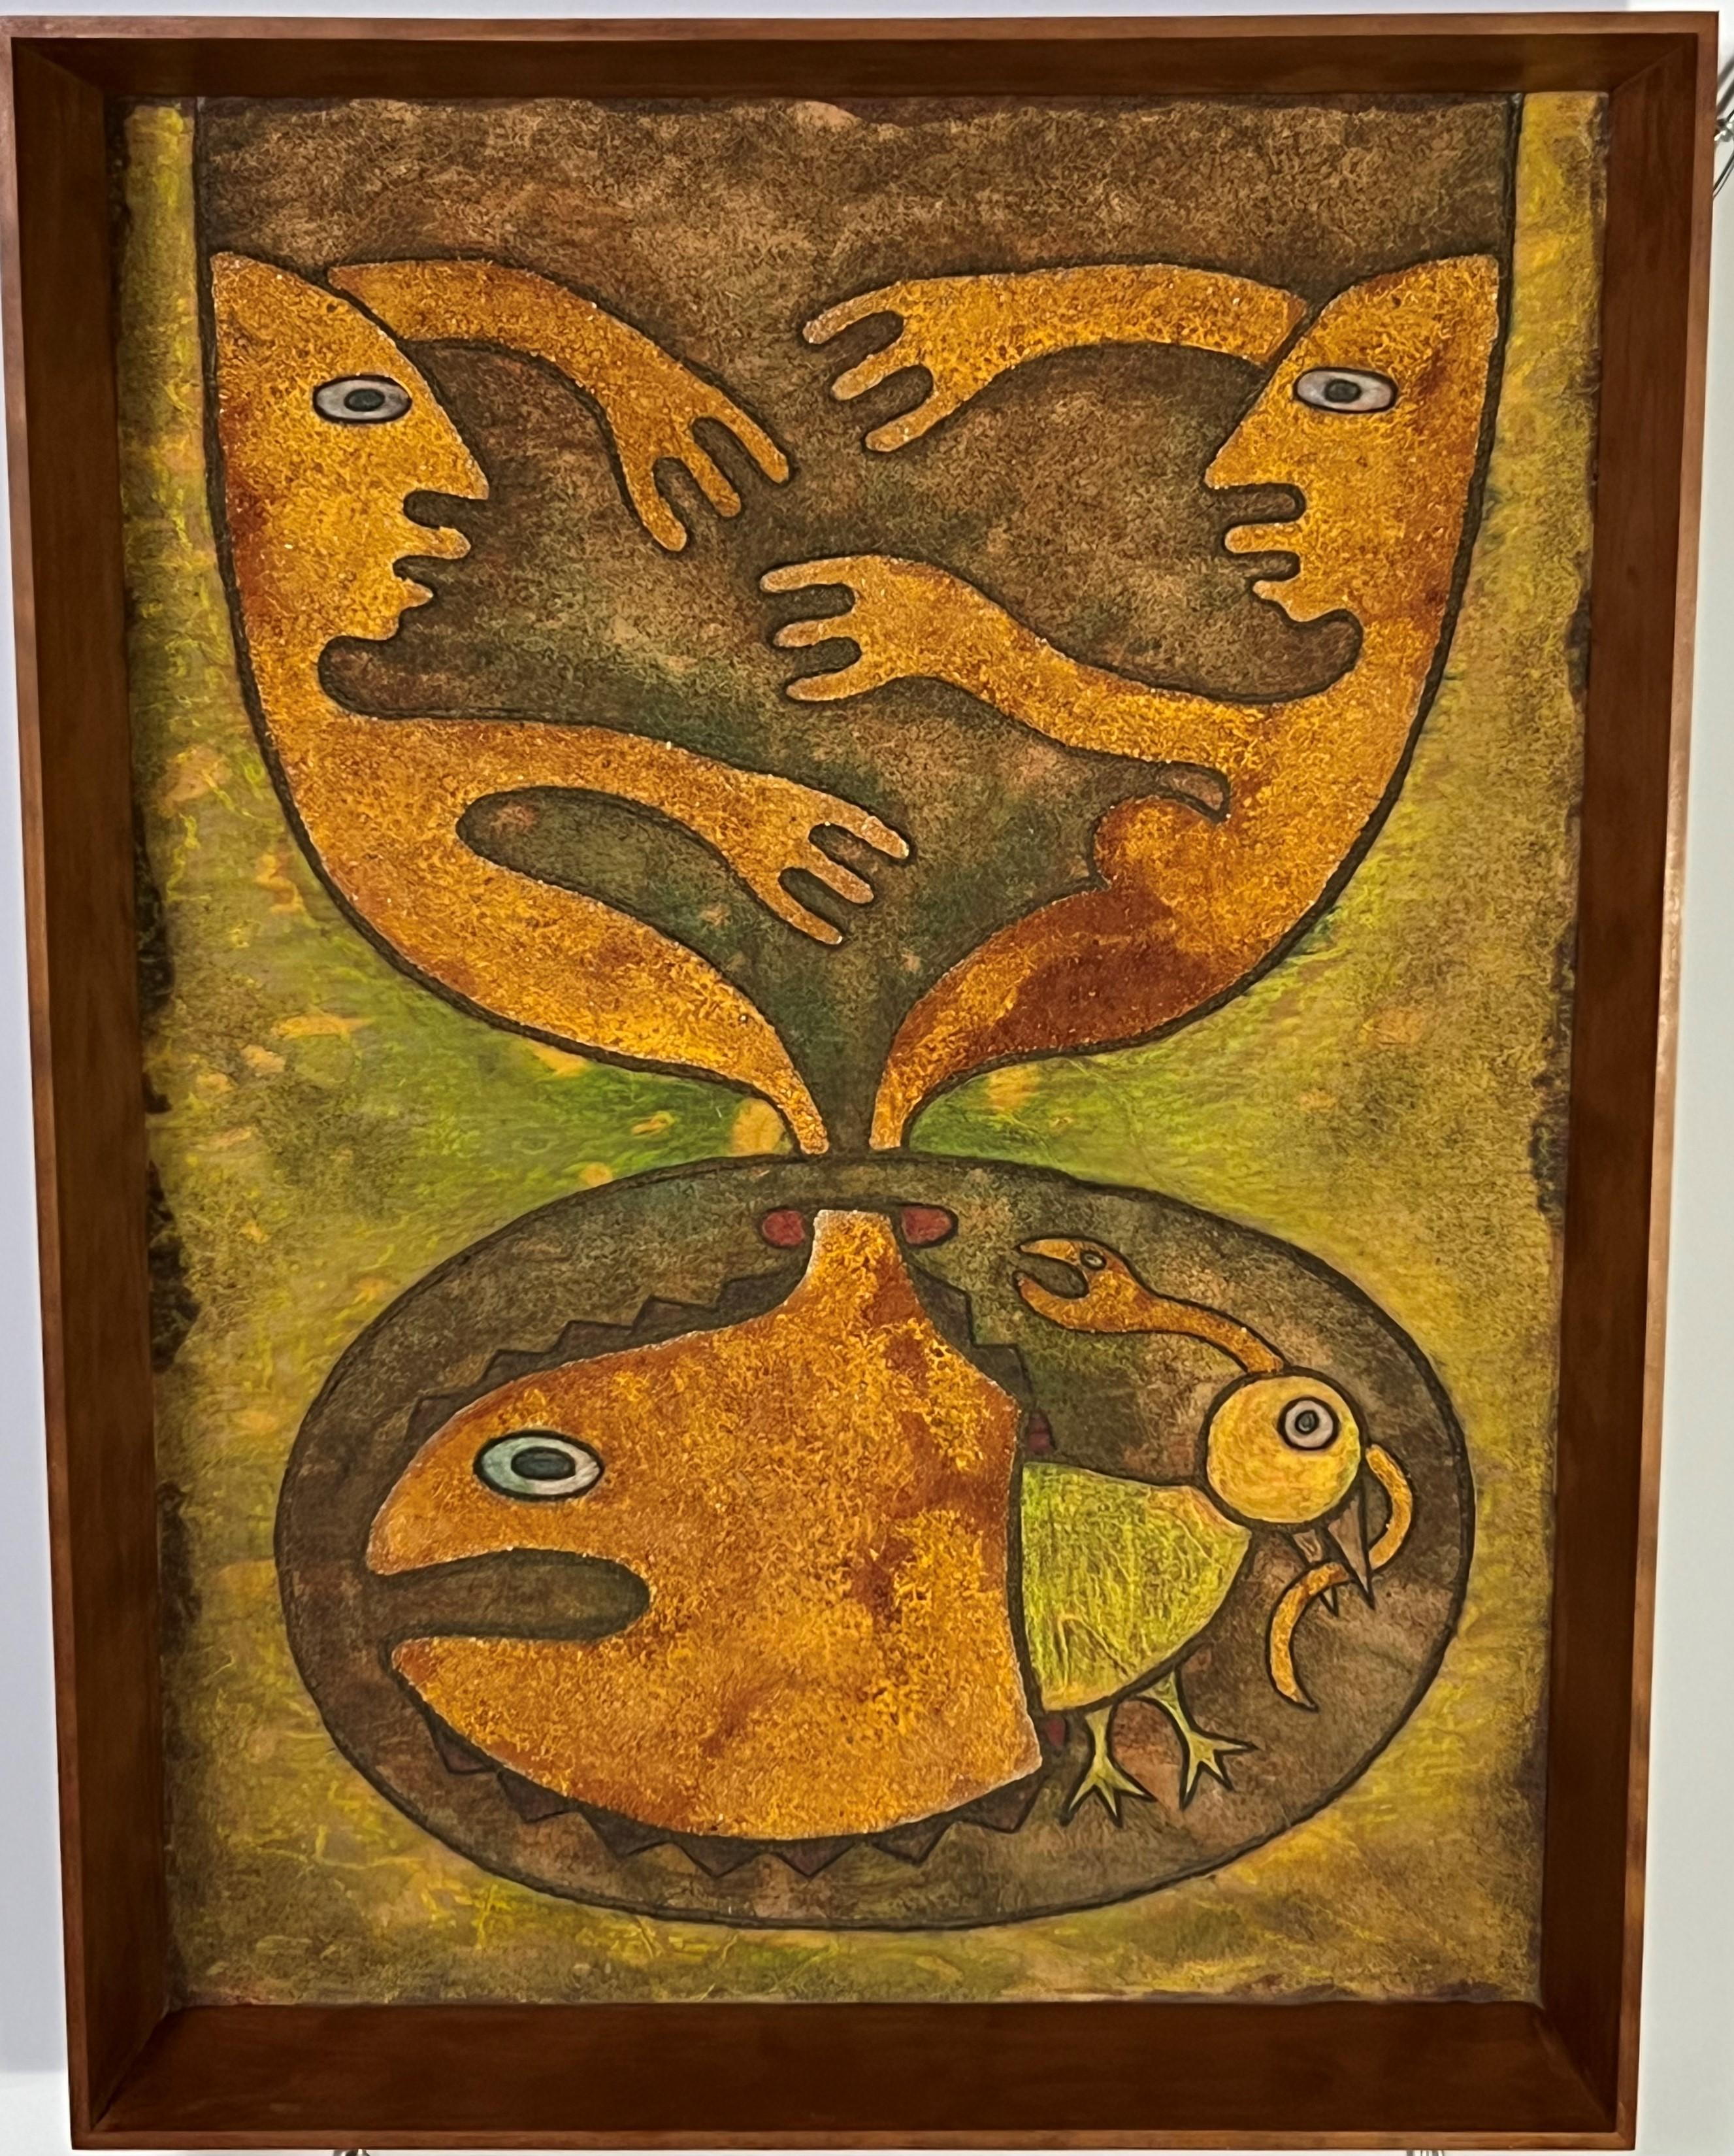 The surrealist sand paintings produced by Edwin Scheier in the 70's and 80's are among the most compelling additions to a mid century modern or contemporary interior. World renowned for their work in ceramics, Mary and Edwin Scheier developed the